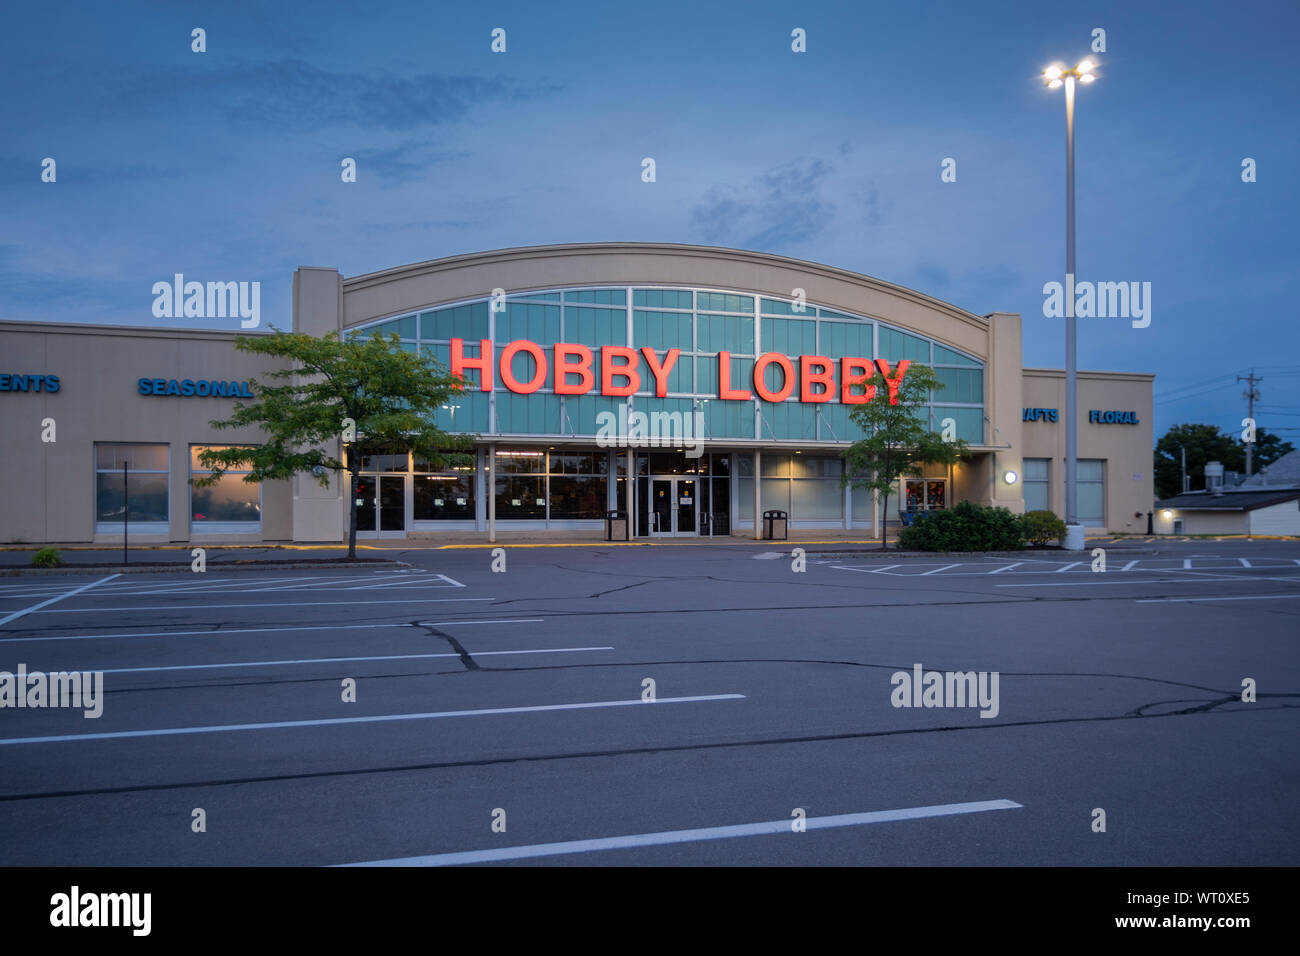 New Hartford, NY - SEPTEMBER 09, 2019: Exterior of Hobby Lobby store. It is an American retail chain of arts and crafts stores. As of 2012, the chain Stock Photo